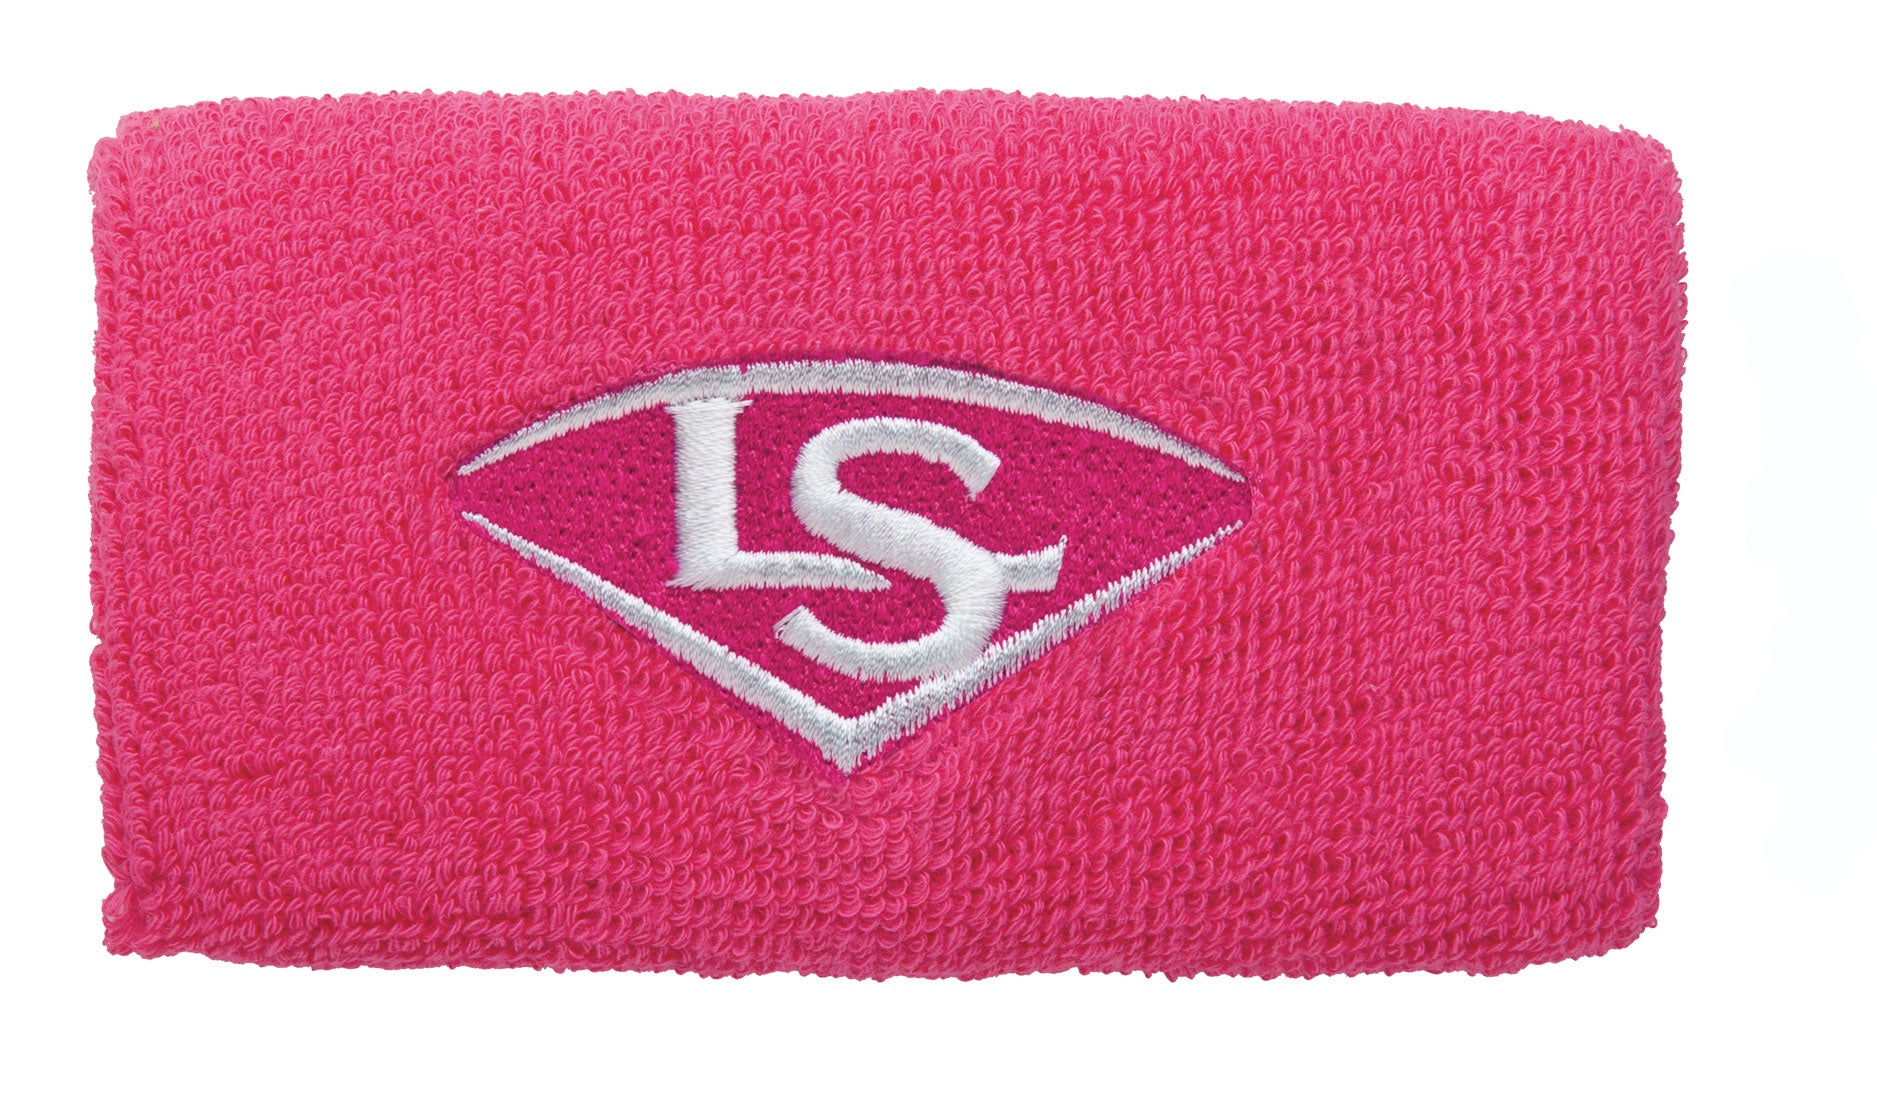 Louisville 5" Traditional Wristbands